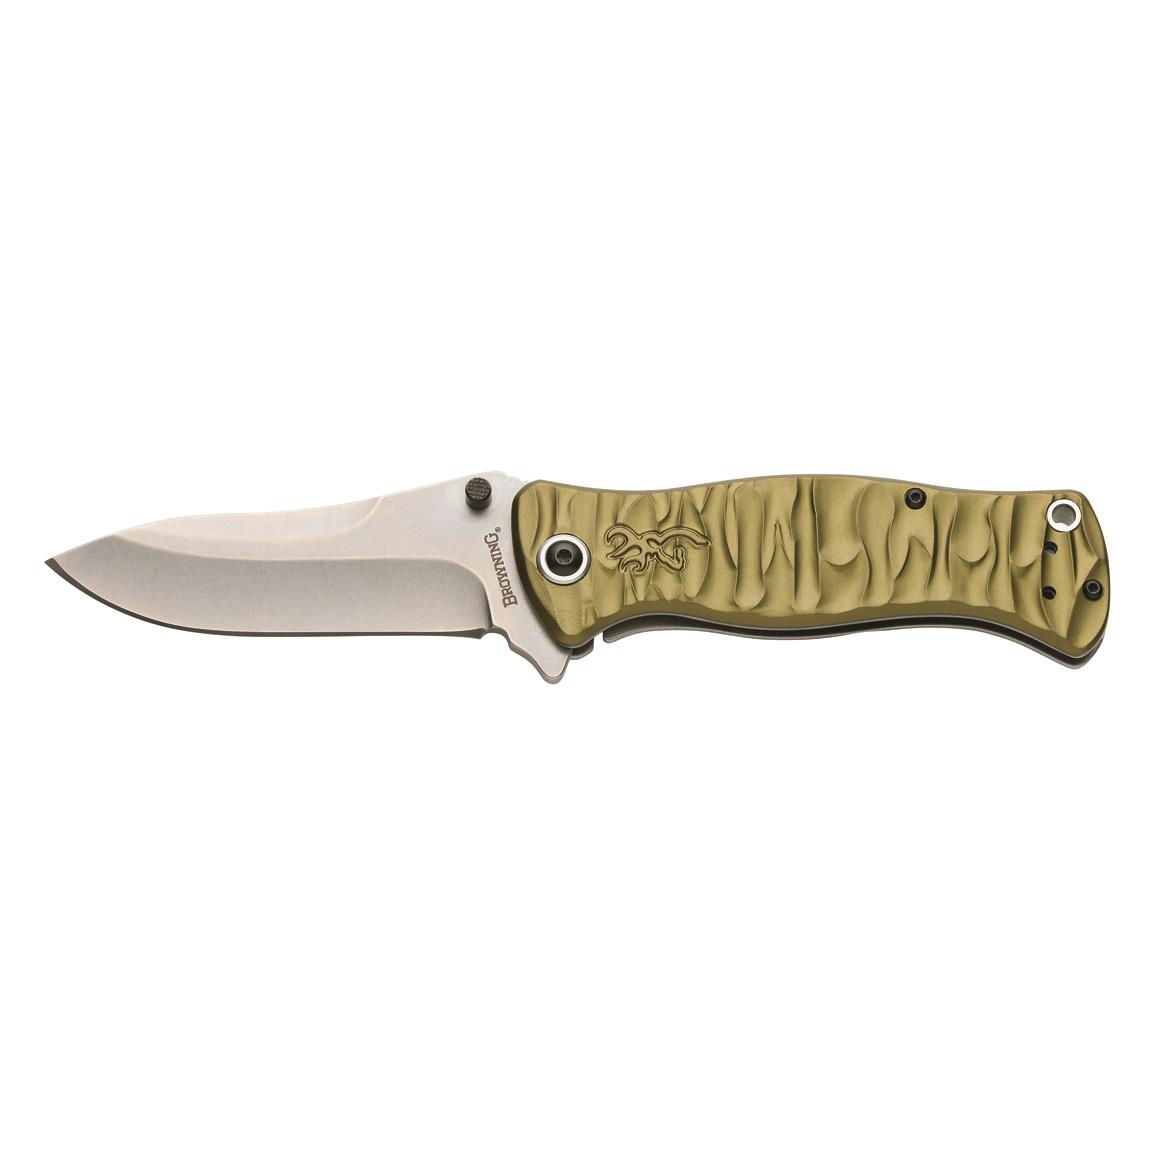 Browning River Stone Folding Knife, Green